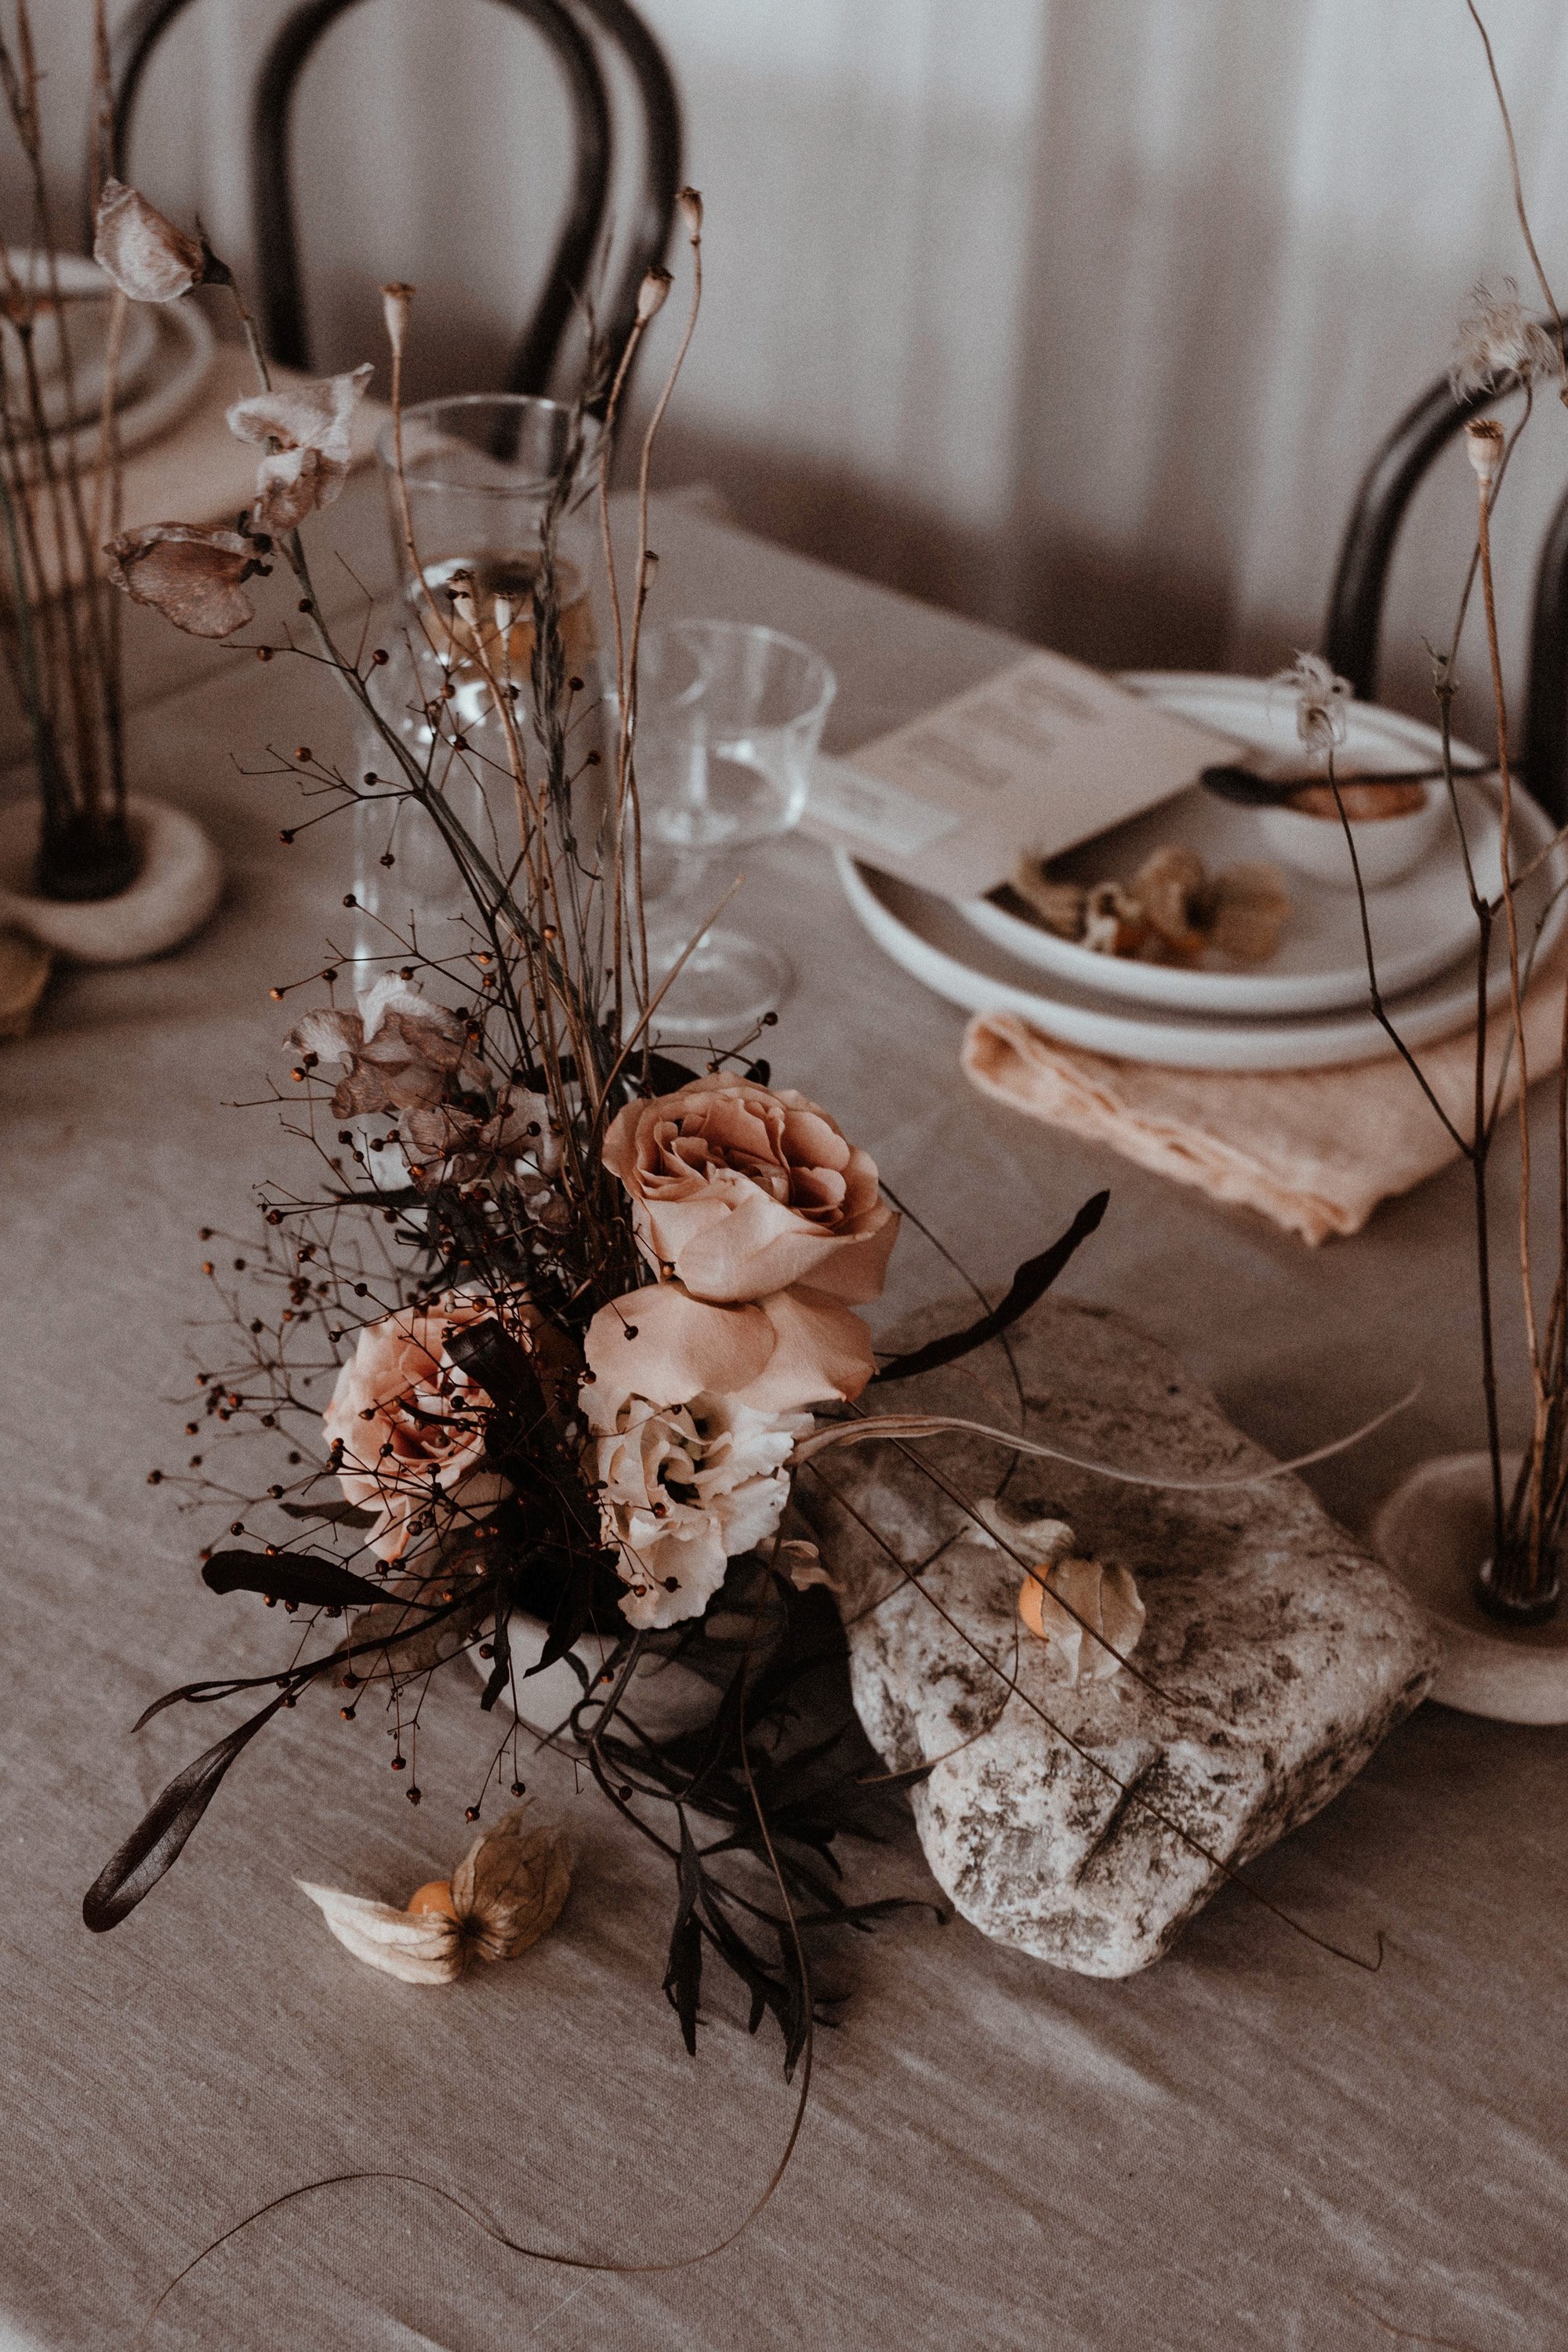 rewild wedding receptions using sustainable details and natural processes